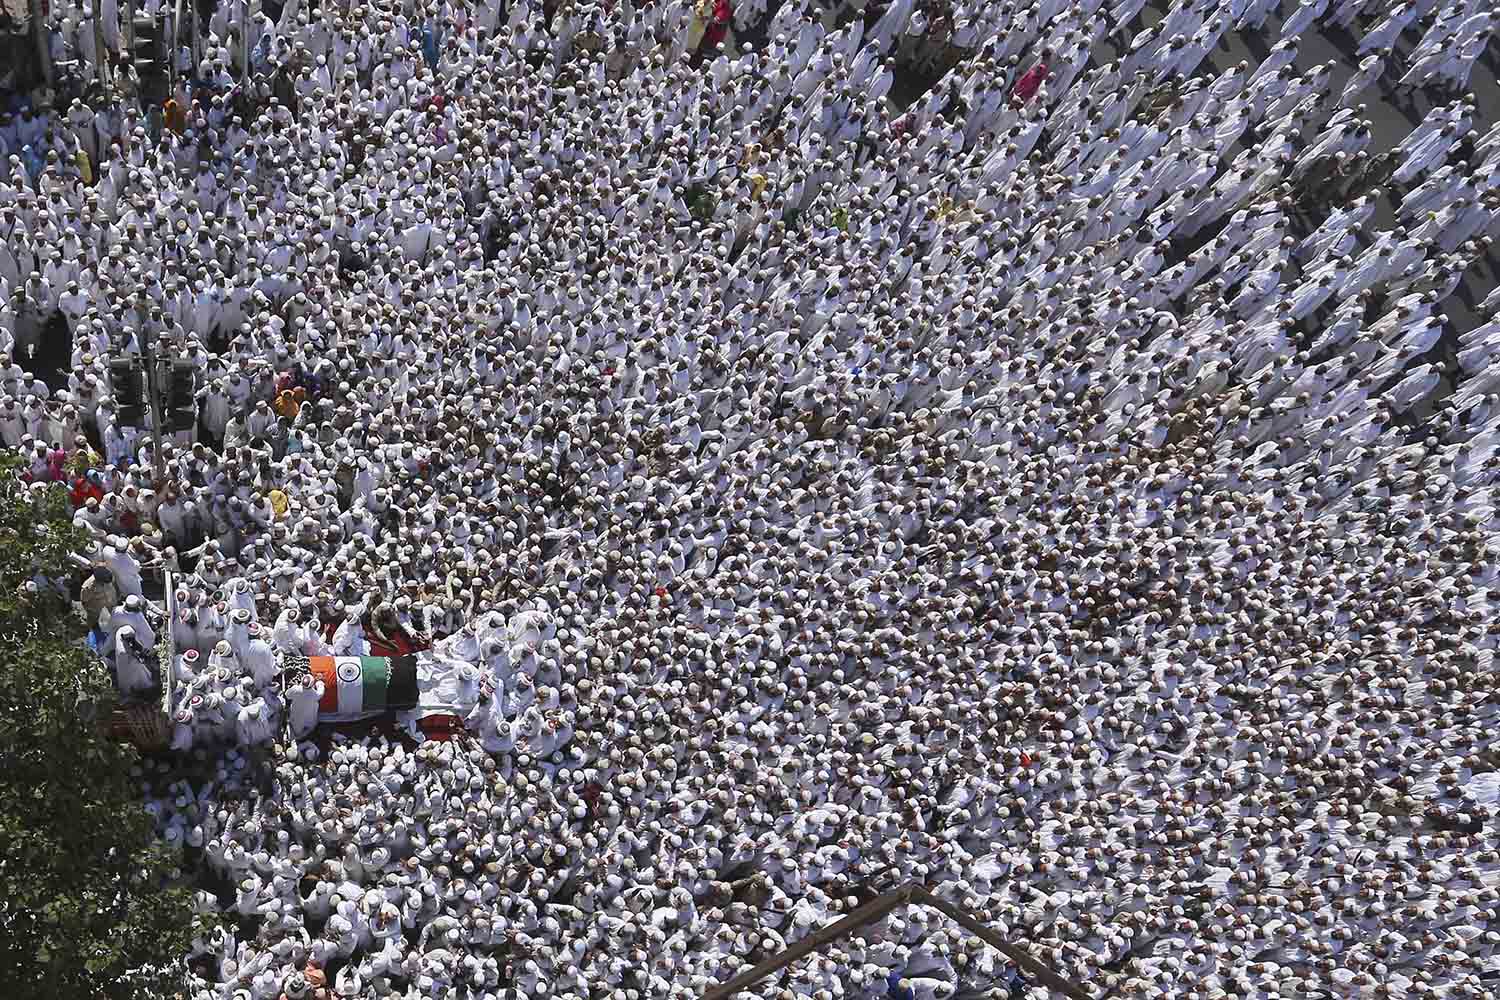 Jan. 18, 2014. Indian Dawoodi Bohra community people participate in the funeral procession of their spiritual leader Syedna Mohammed Burhanuddin, in Mumbai, India.